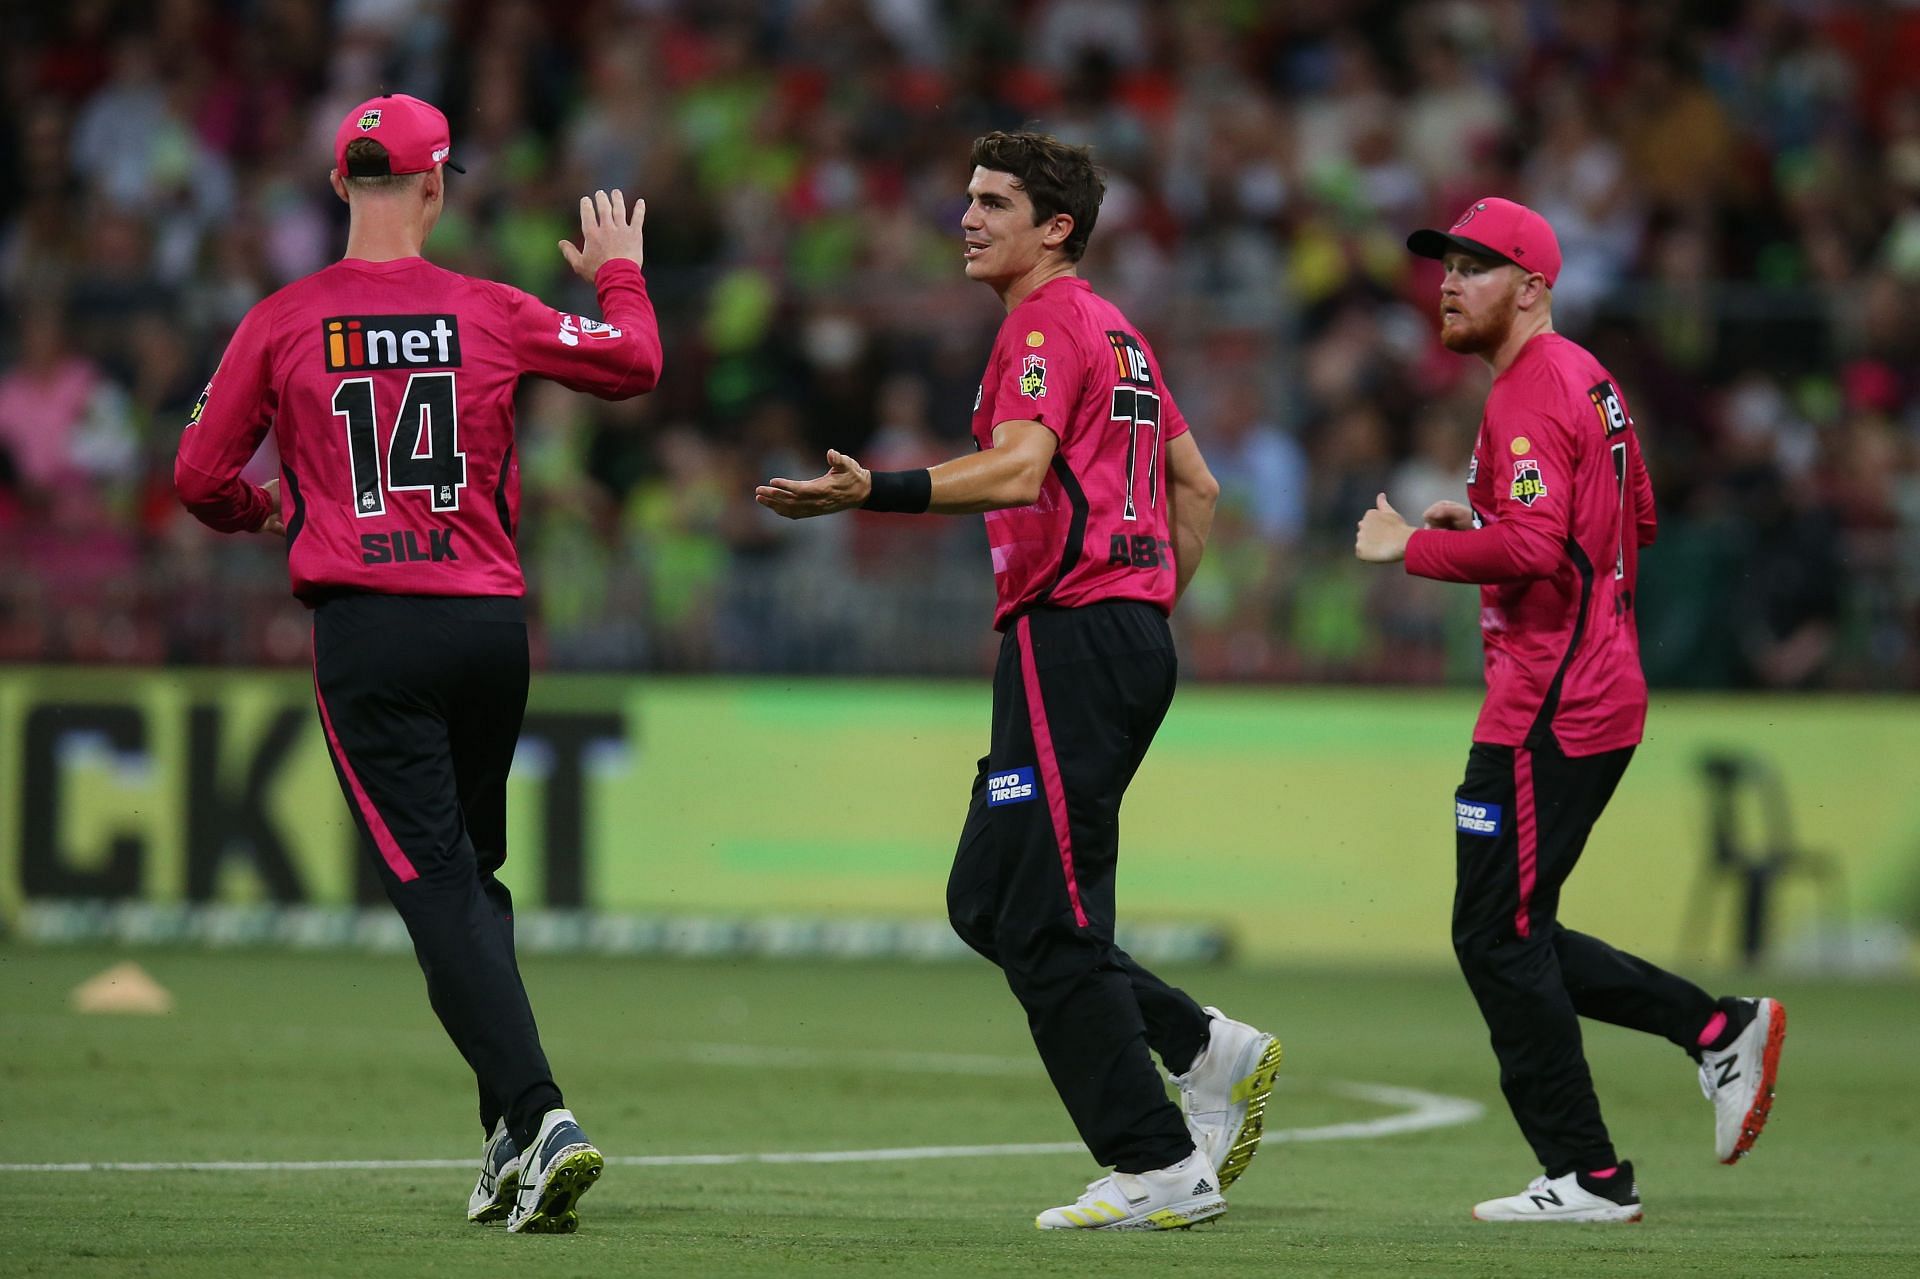 Big Bash League 2021, Sydney Sixers vs Brisbane Heat Probable XIs, Match prediction, Weather Forecast, Pitch Report and Live Streaming Details